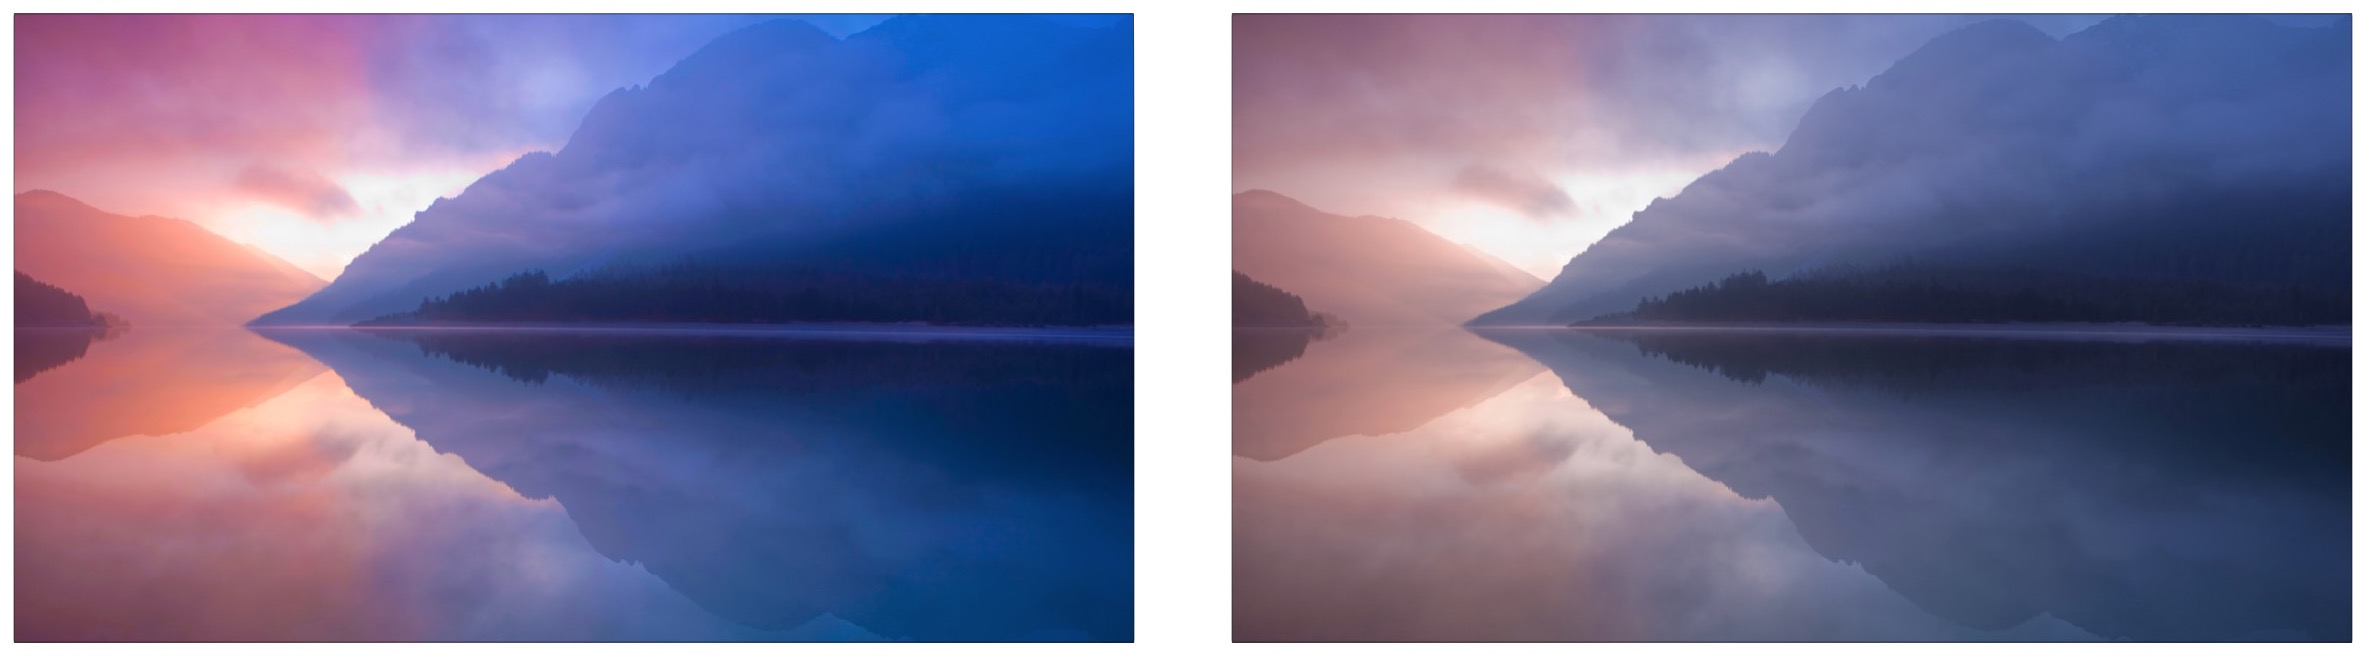 After and before color saturation adjustment in Mac OS X